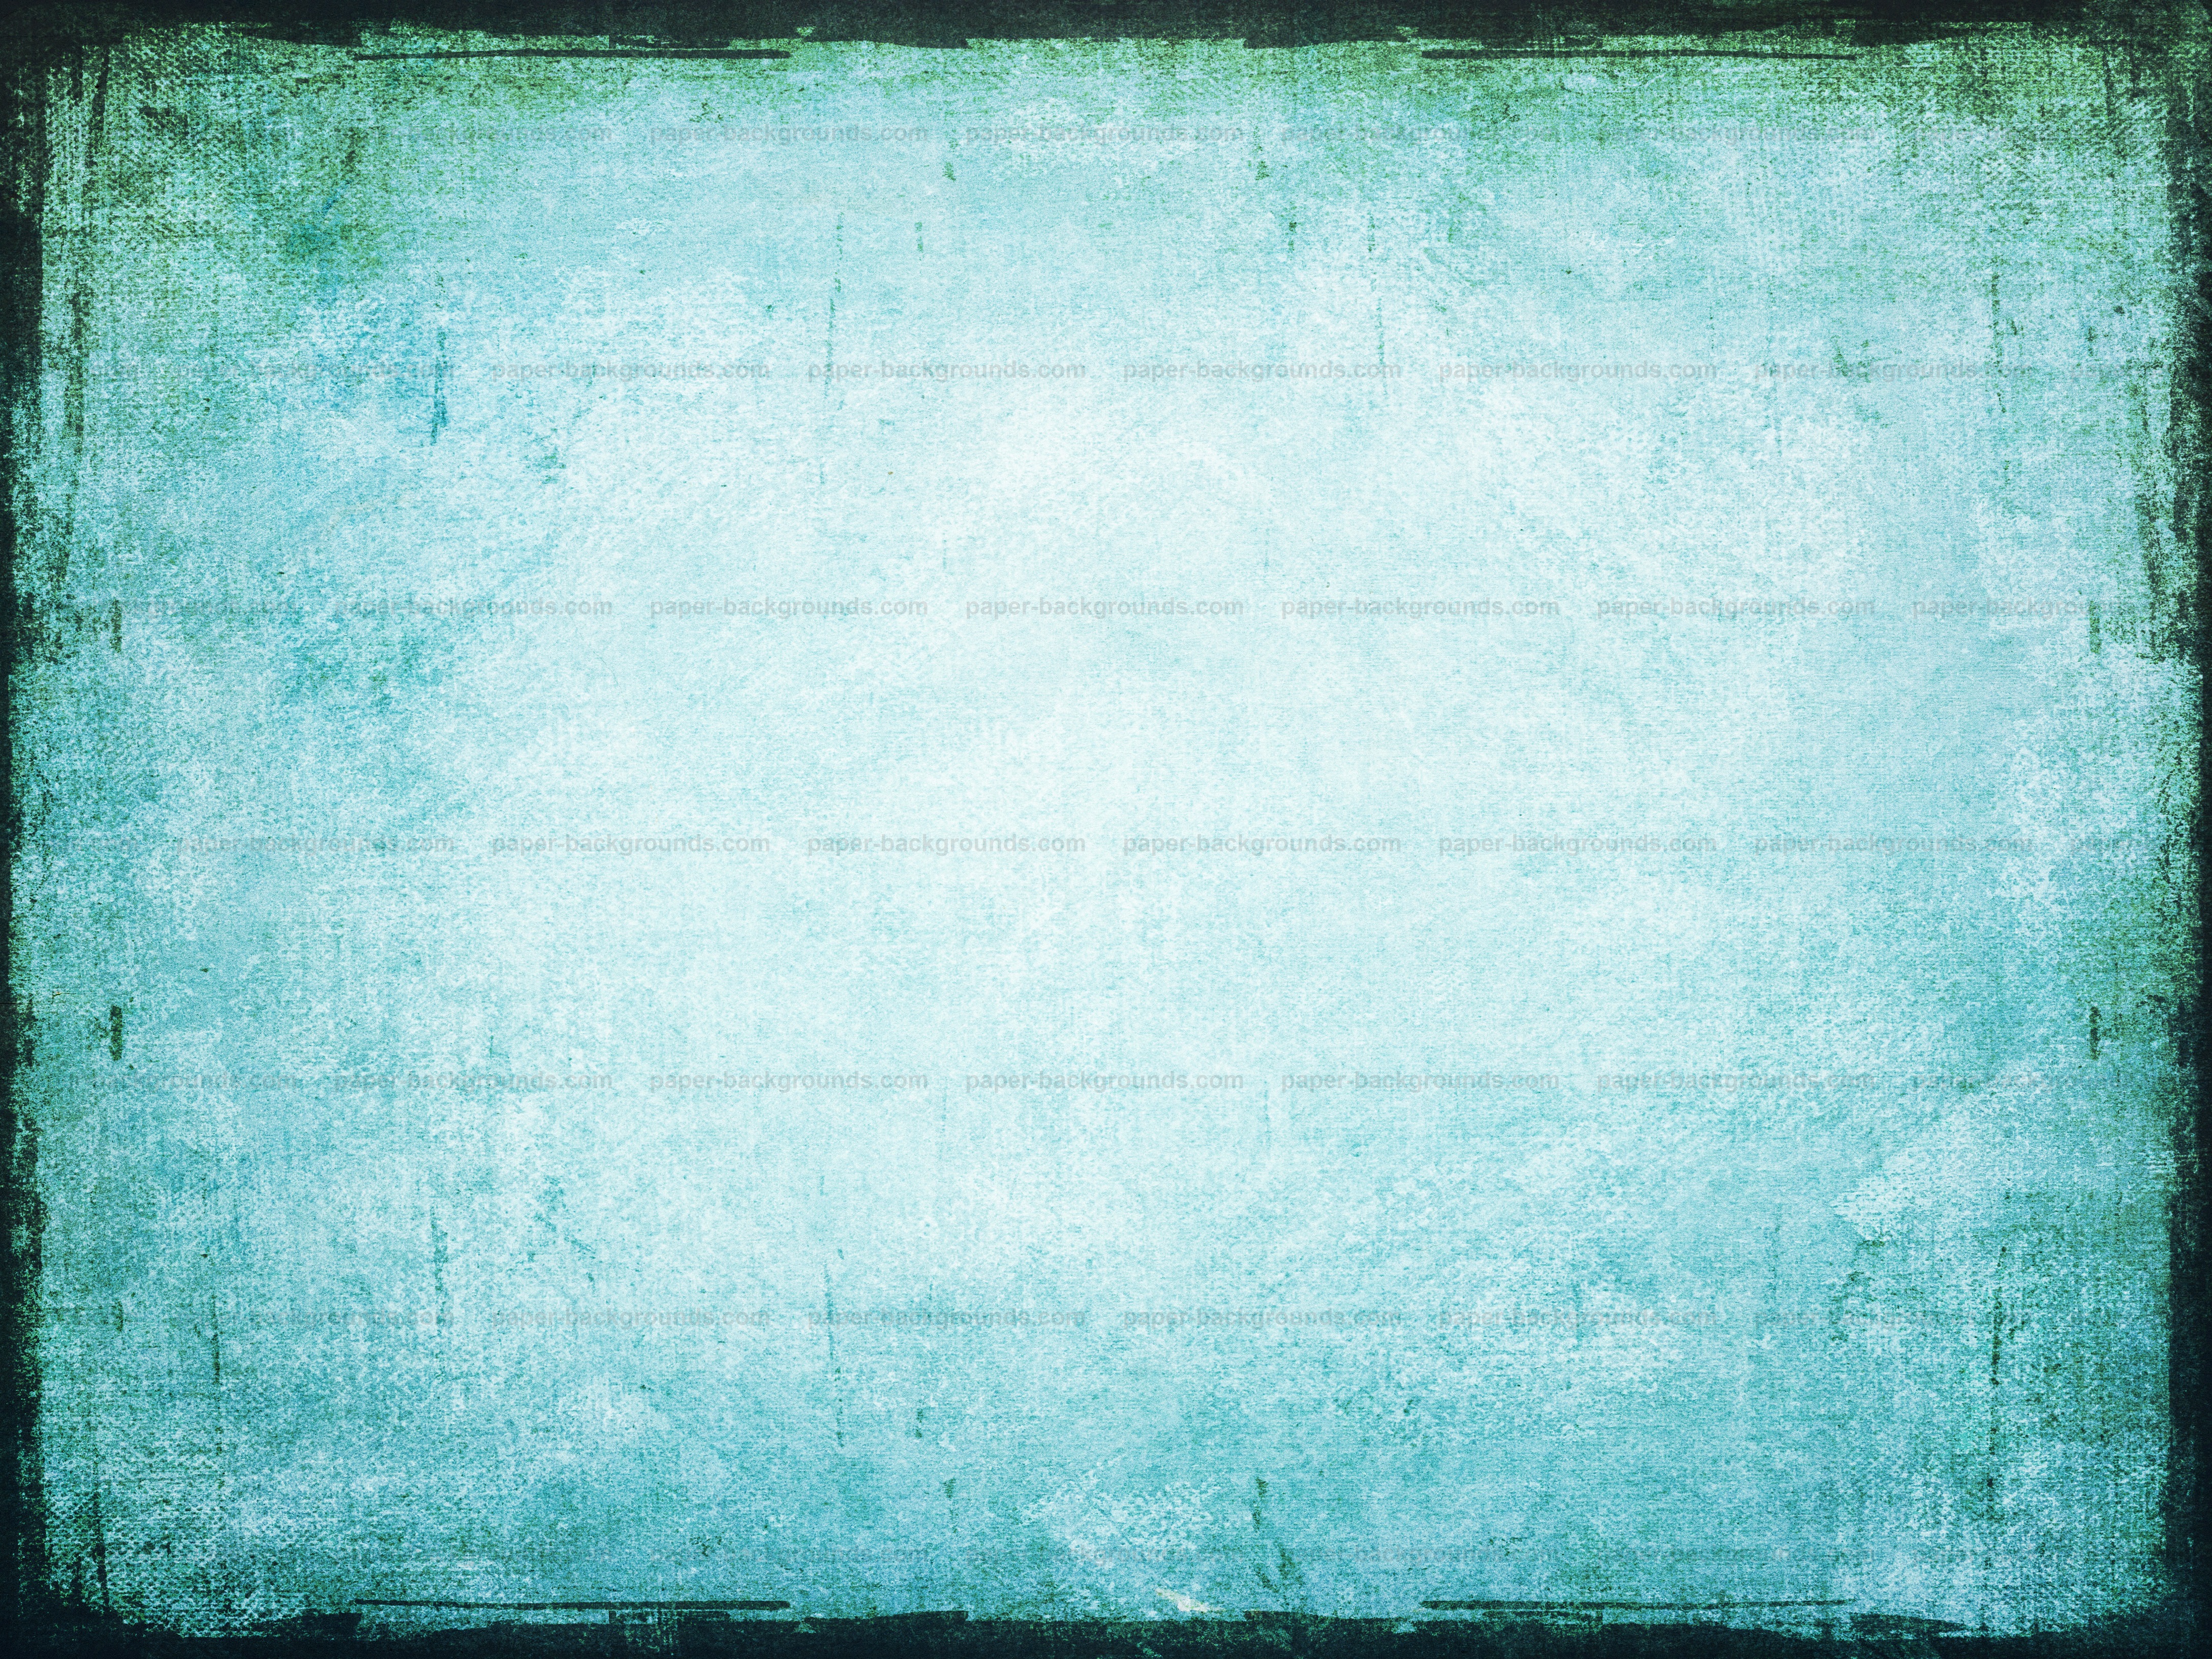 Paper Backgrounds | Grunge Blue Painted Wall Background